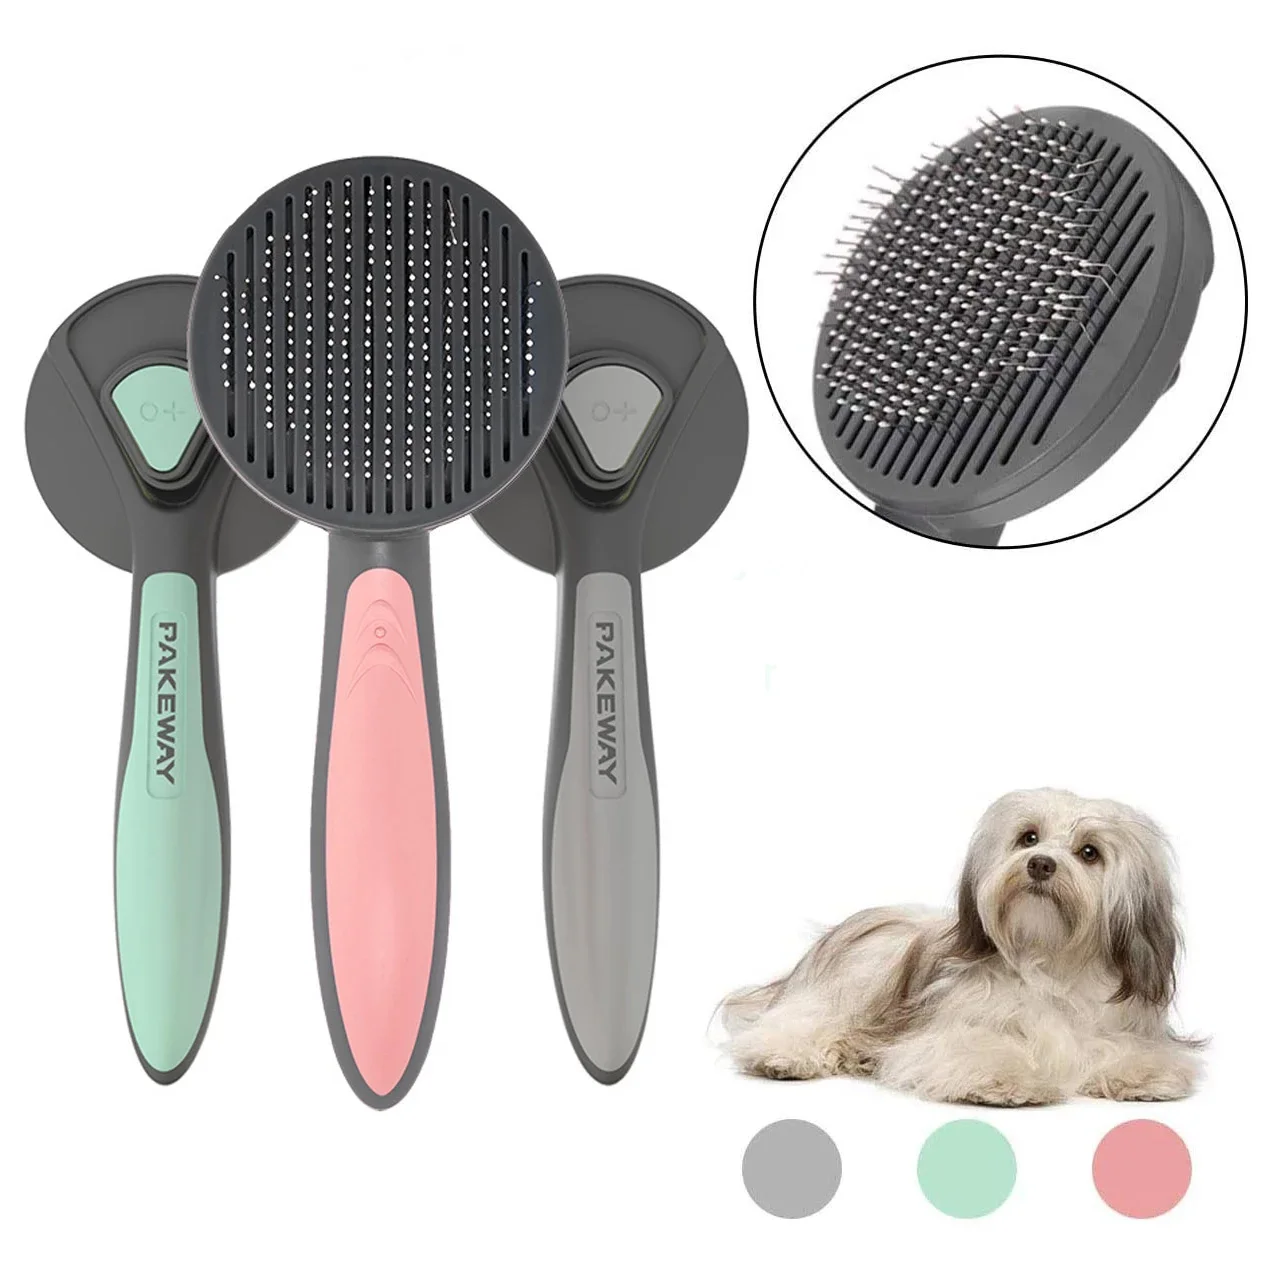 Dog Cat Comb Pet Hair Removal Grooming Comb Cat Puppy Remover Brush Deshedding Tool For Dogs.jpg